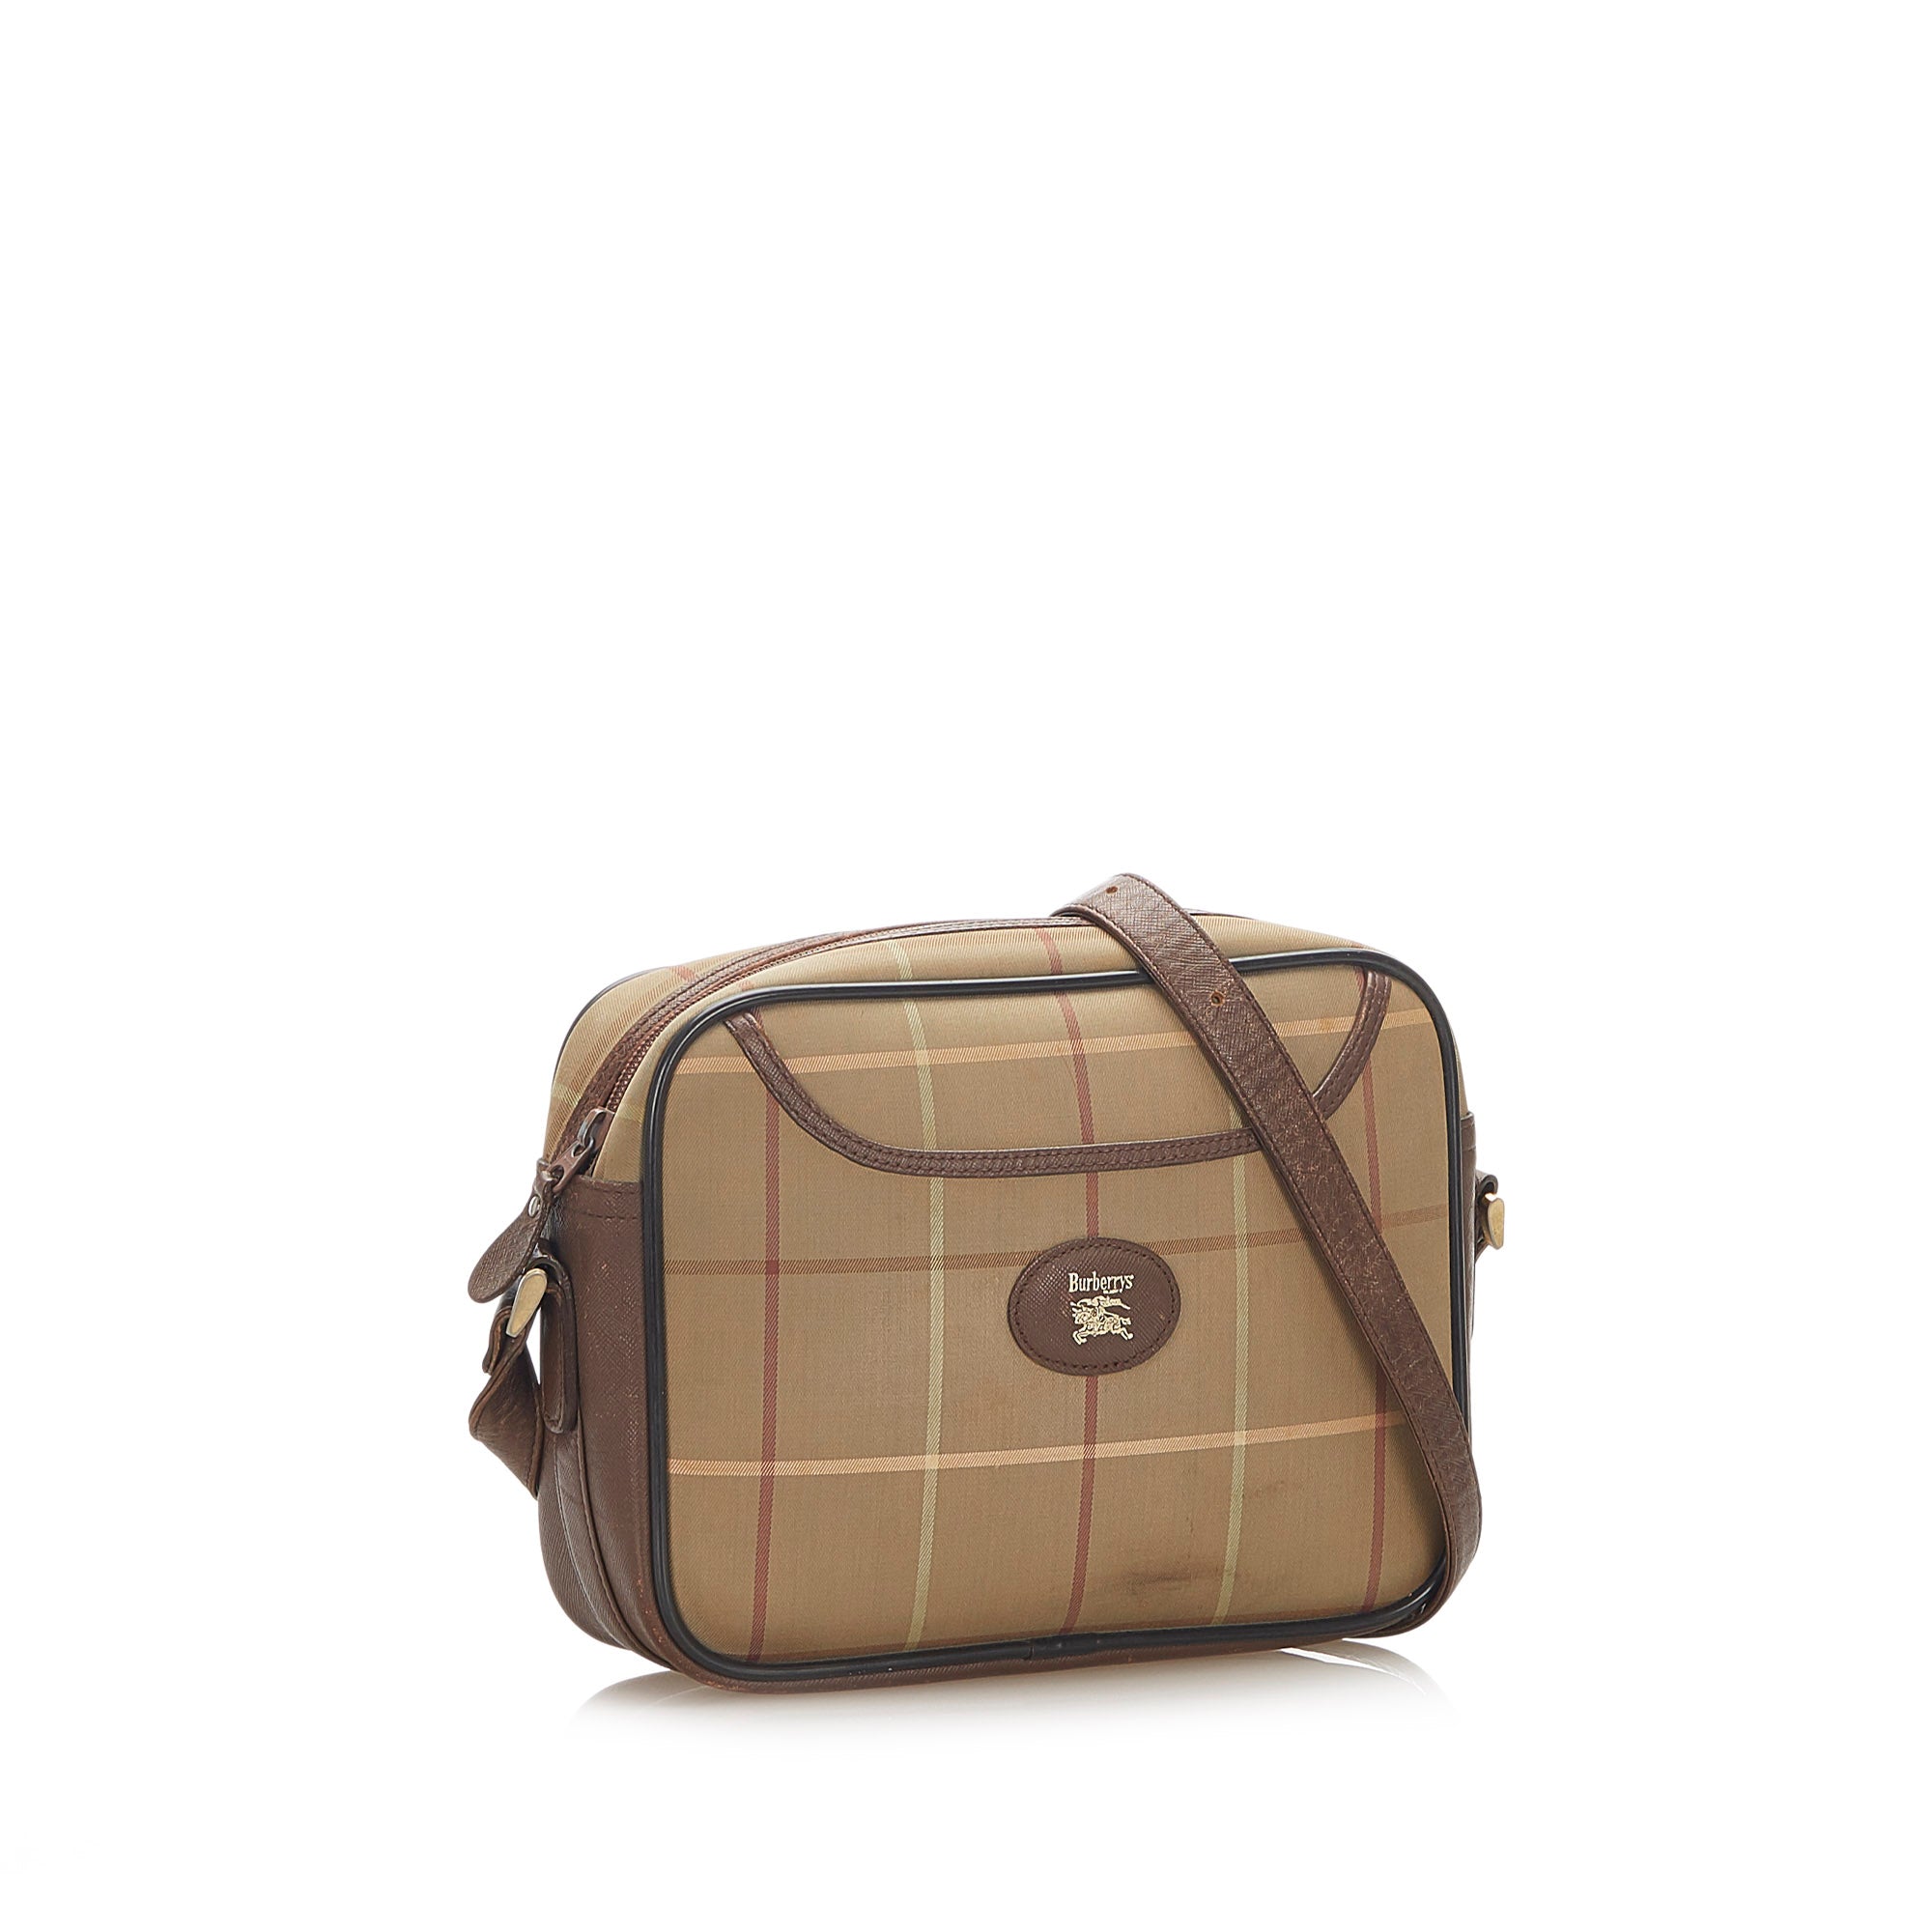 Burberry, Bags, Original Burberry Purse Brown Leather And Plaid